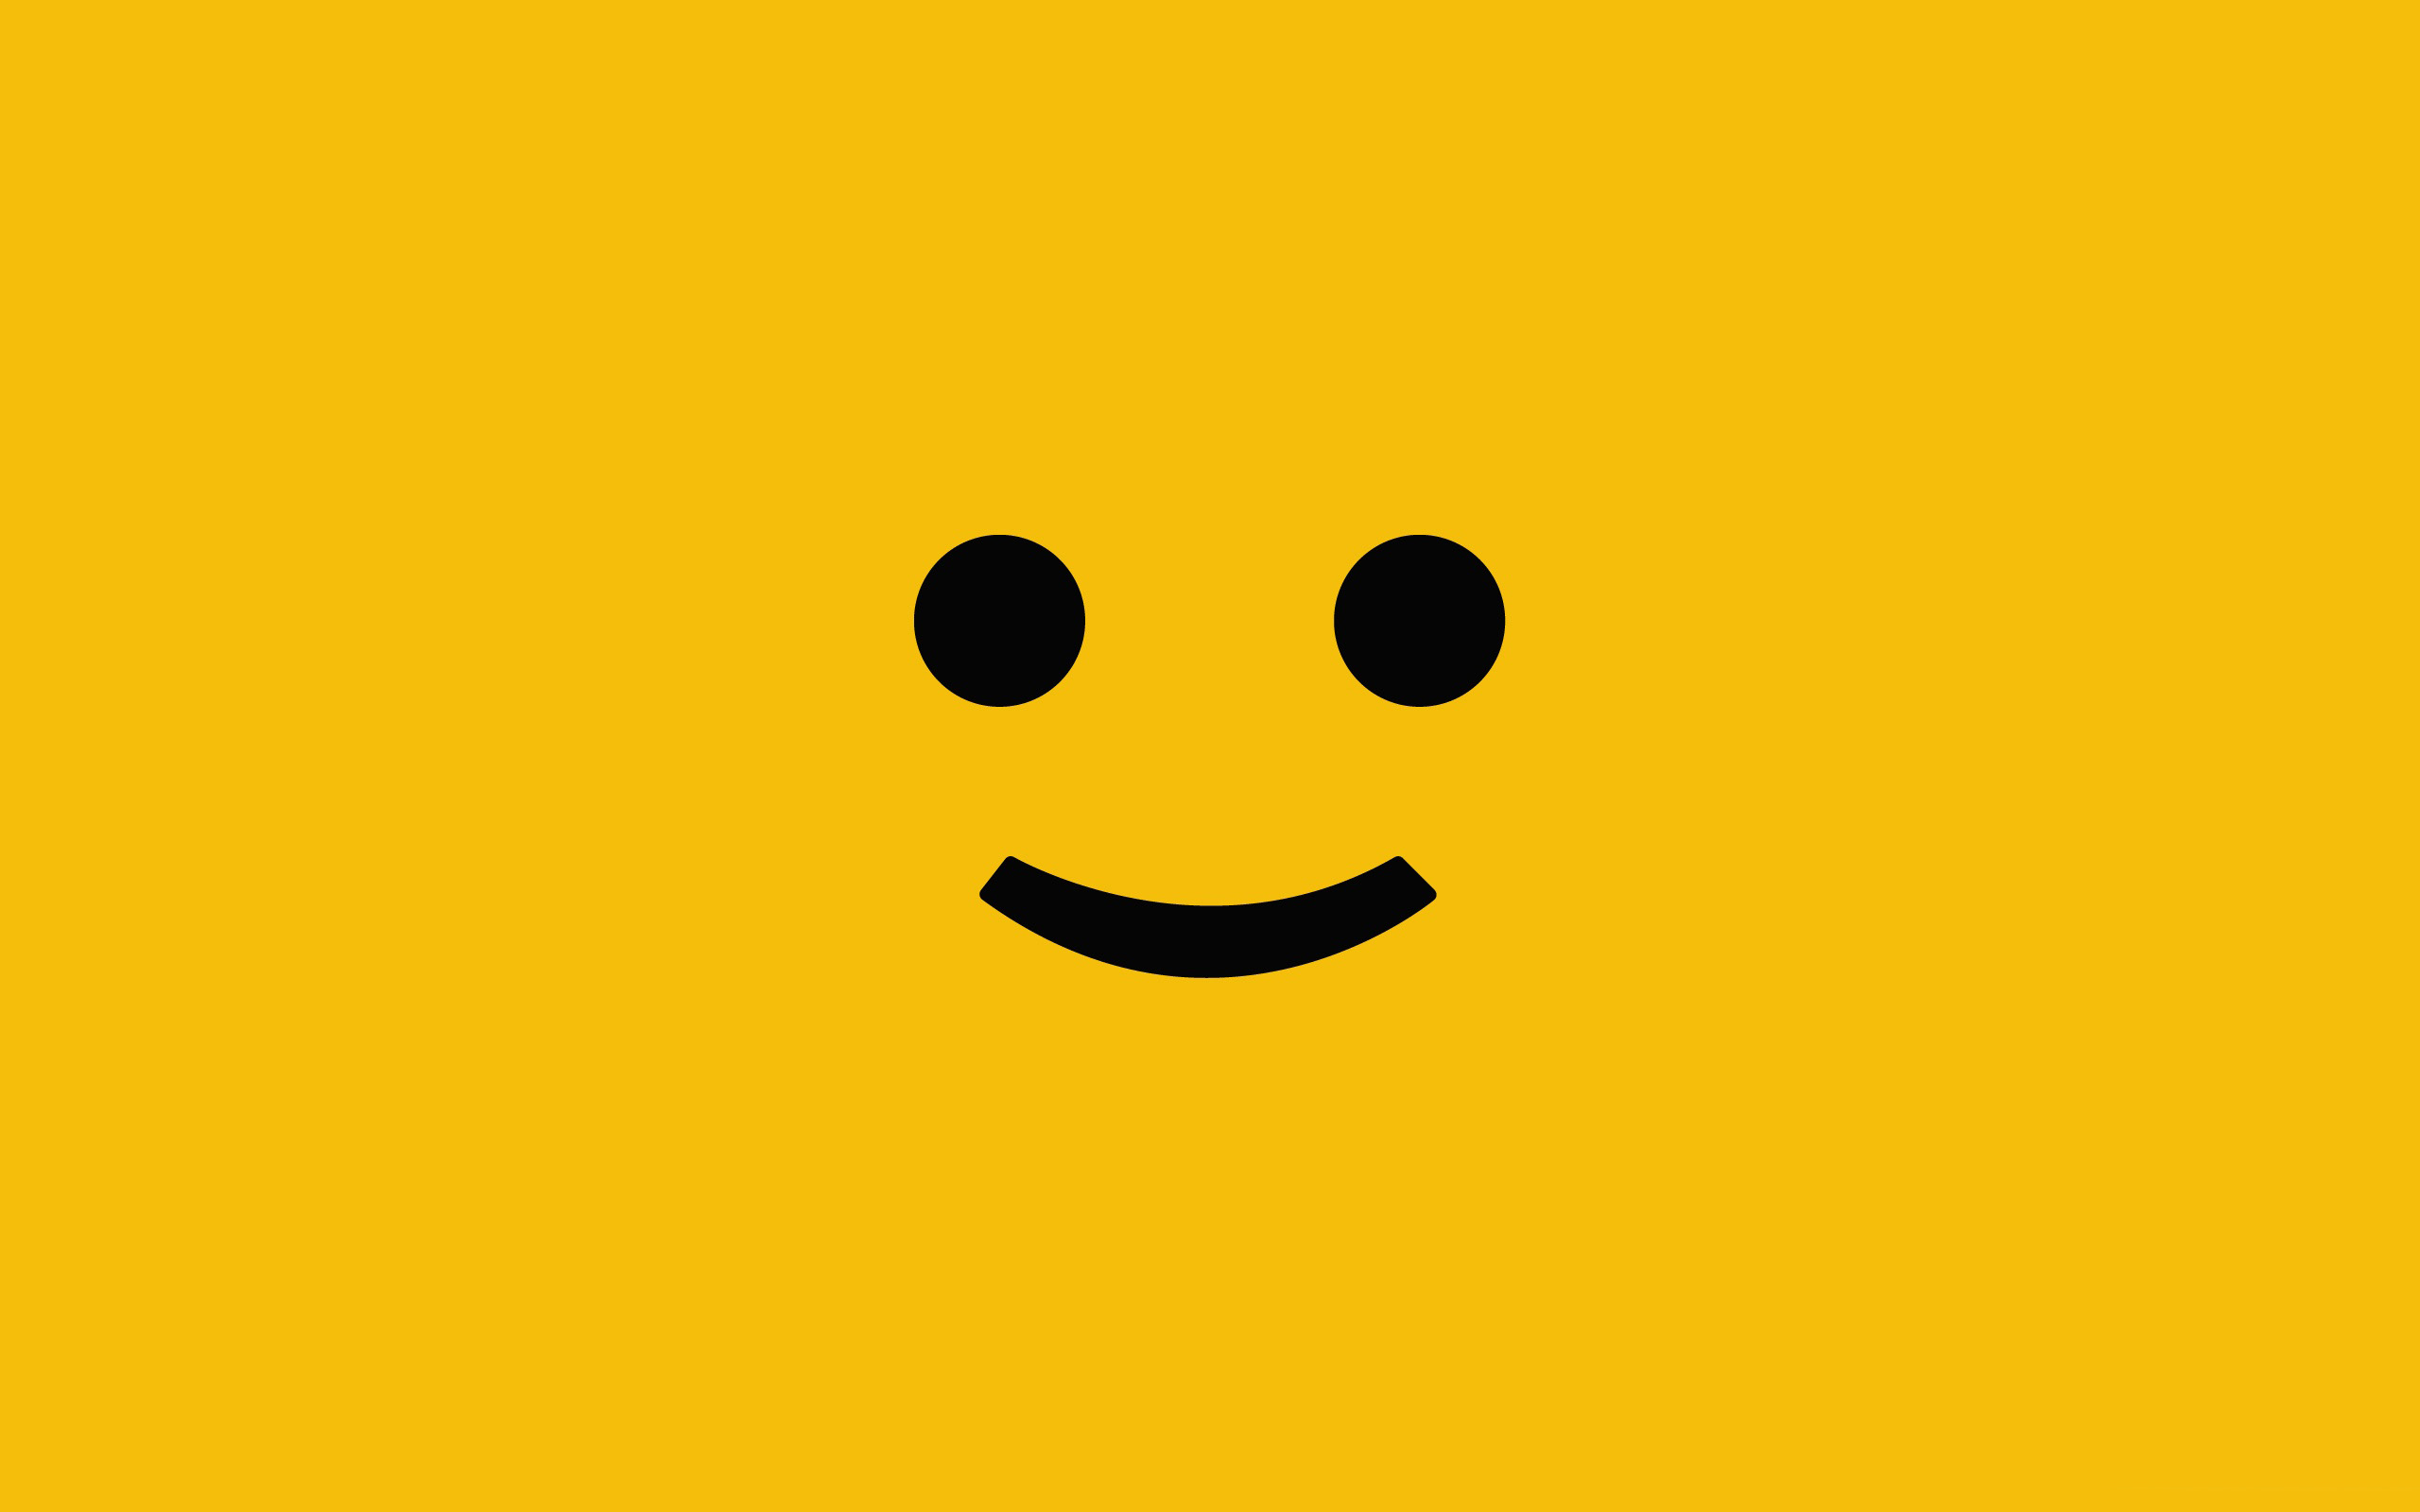 Wallpapers For > Colorful Smiley Face Wallpaper